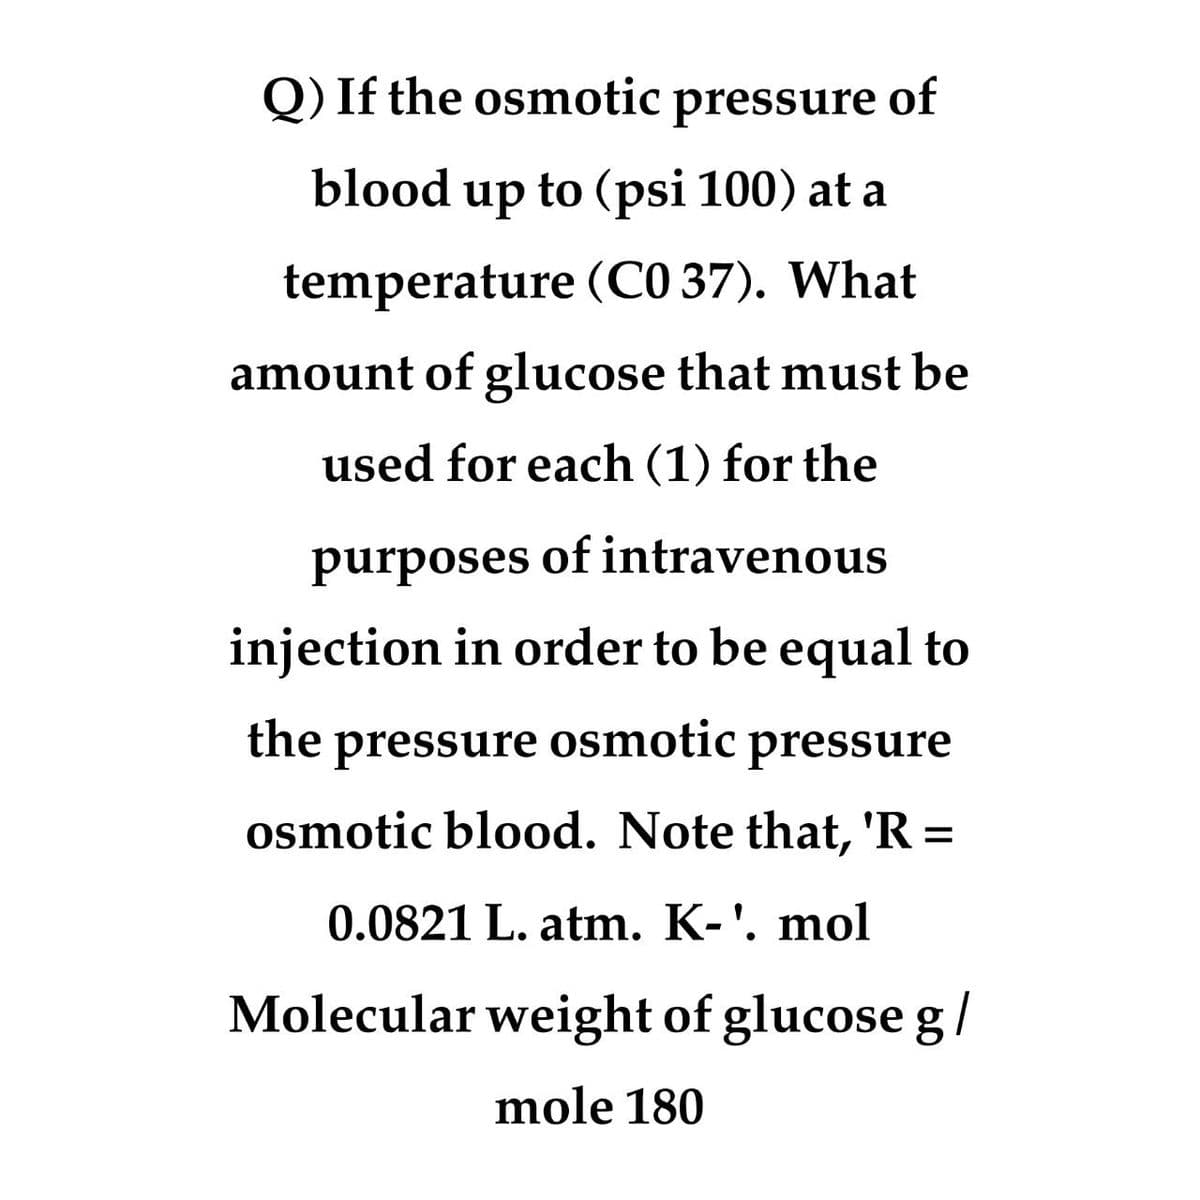 Q) If the osmotic
pressure of
blood up to (psi 100) at a
temperature (C0 37). What
amount of glucose that must be
used for each (1) for the
purposes of intravenous
injection in order to be equal to
the pressure osmotic pressure
osmotic blood. Note that, 'R=
0.0821 L. atm. K-'. mol
Molecular weight of glucose g/
mole 180